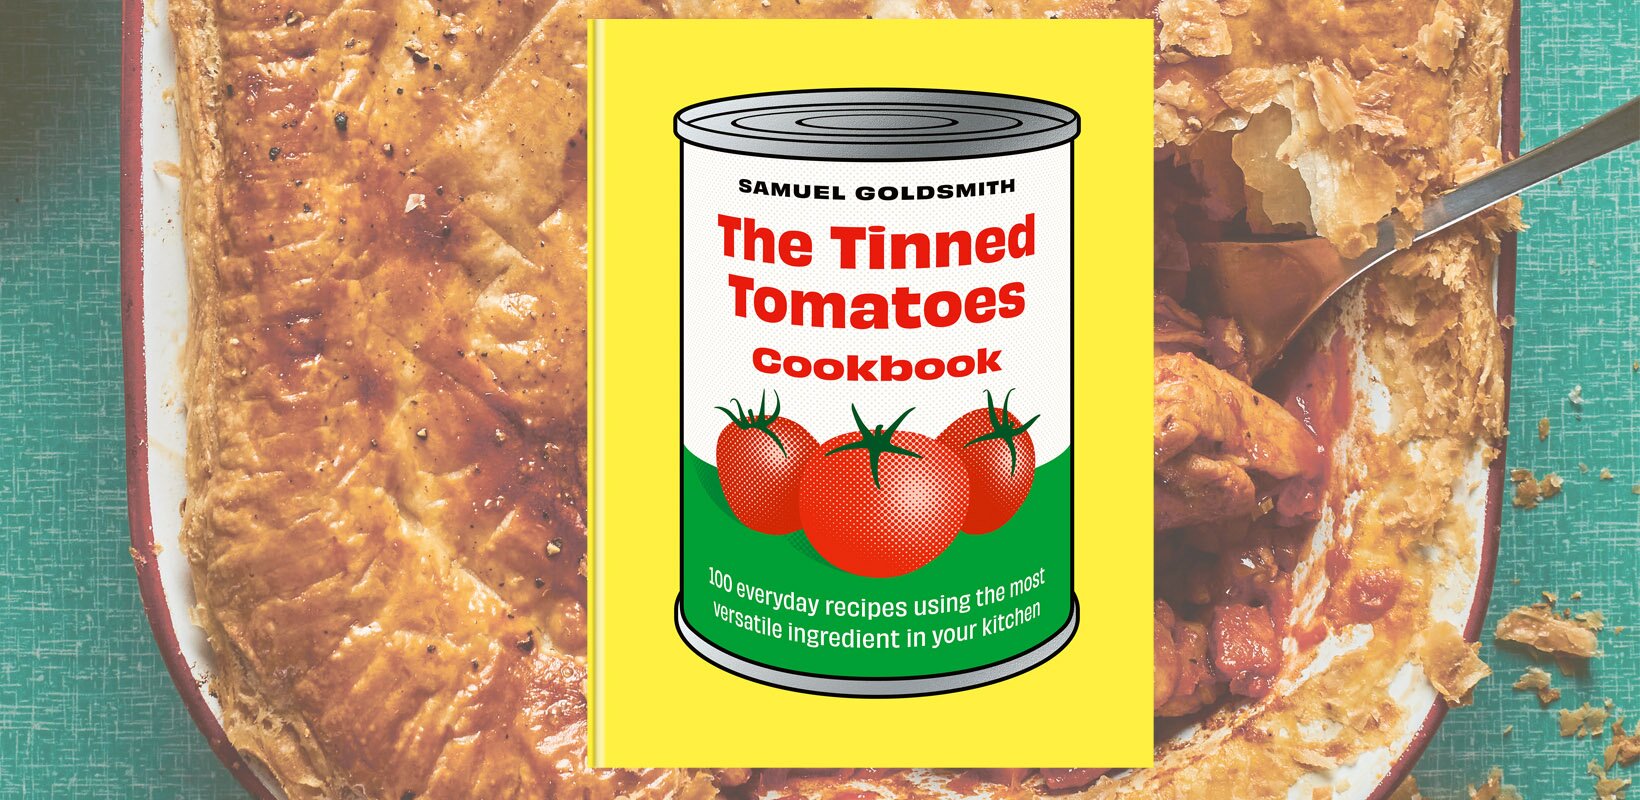 Book review: The Tinned Tomatoes Cookbook by Samuel Goldsmith